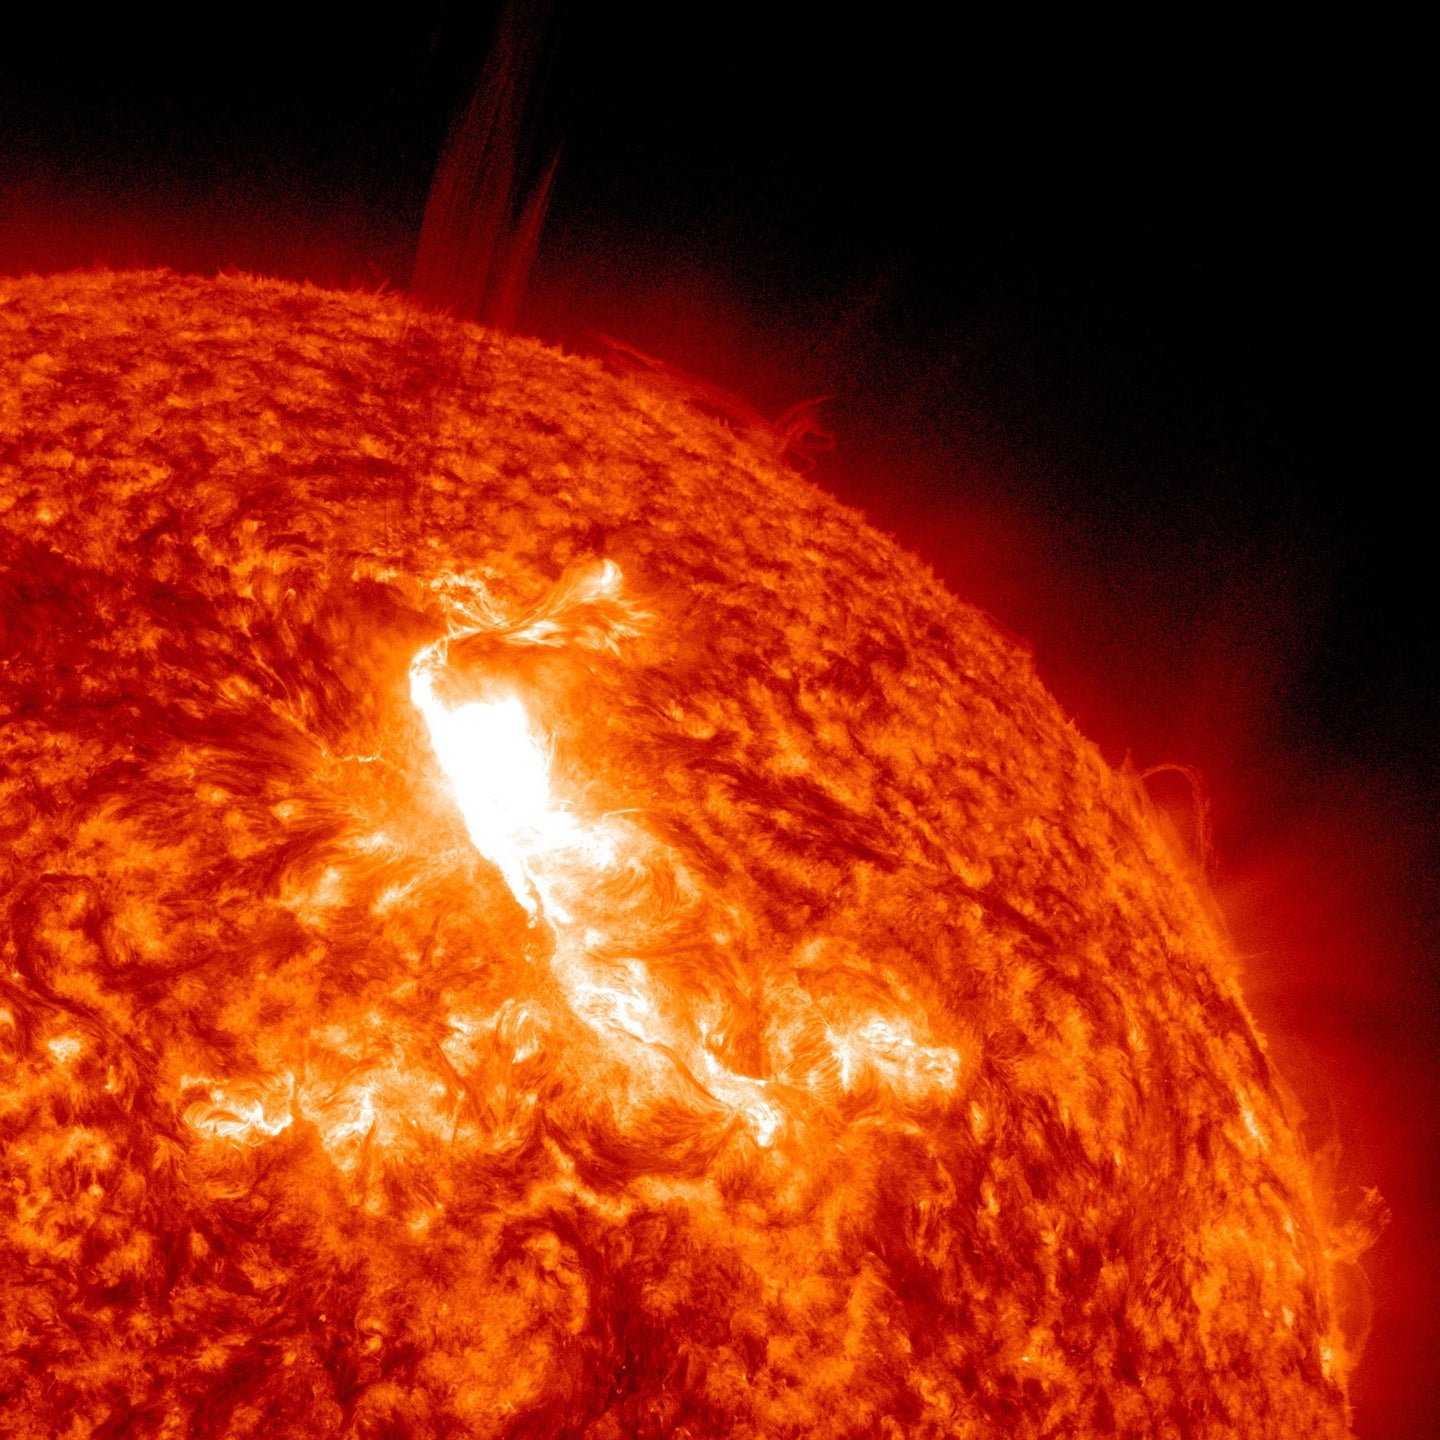 How cold is space, and how hot is the sun?